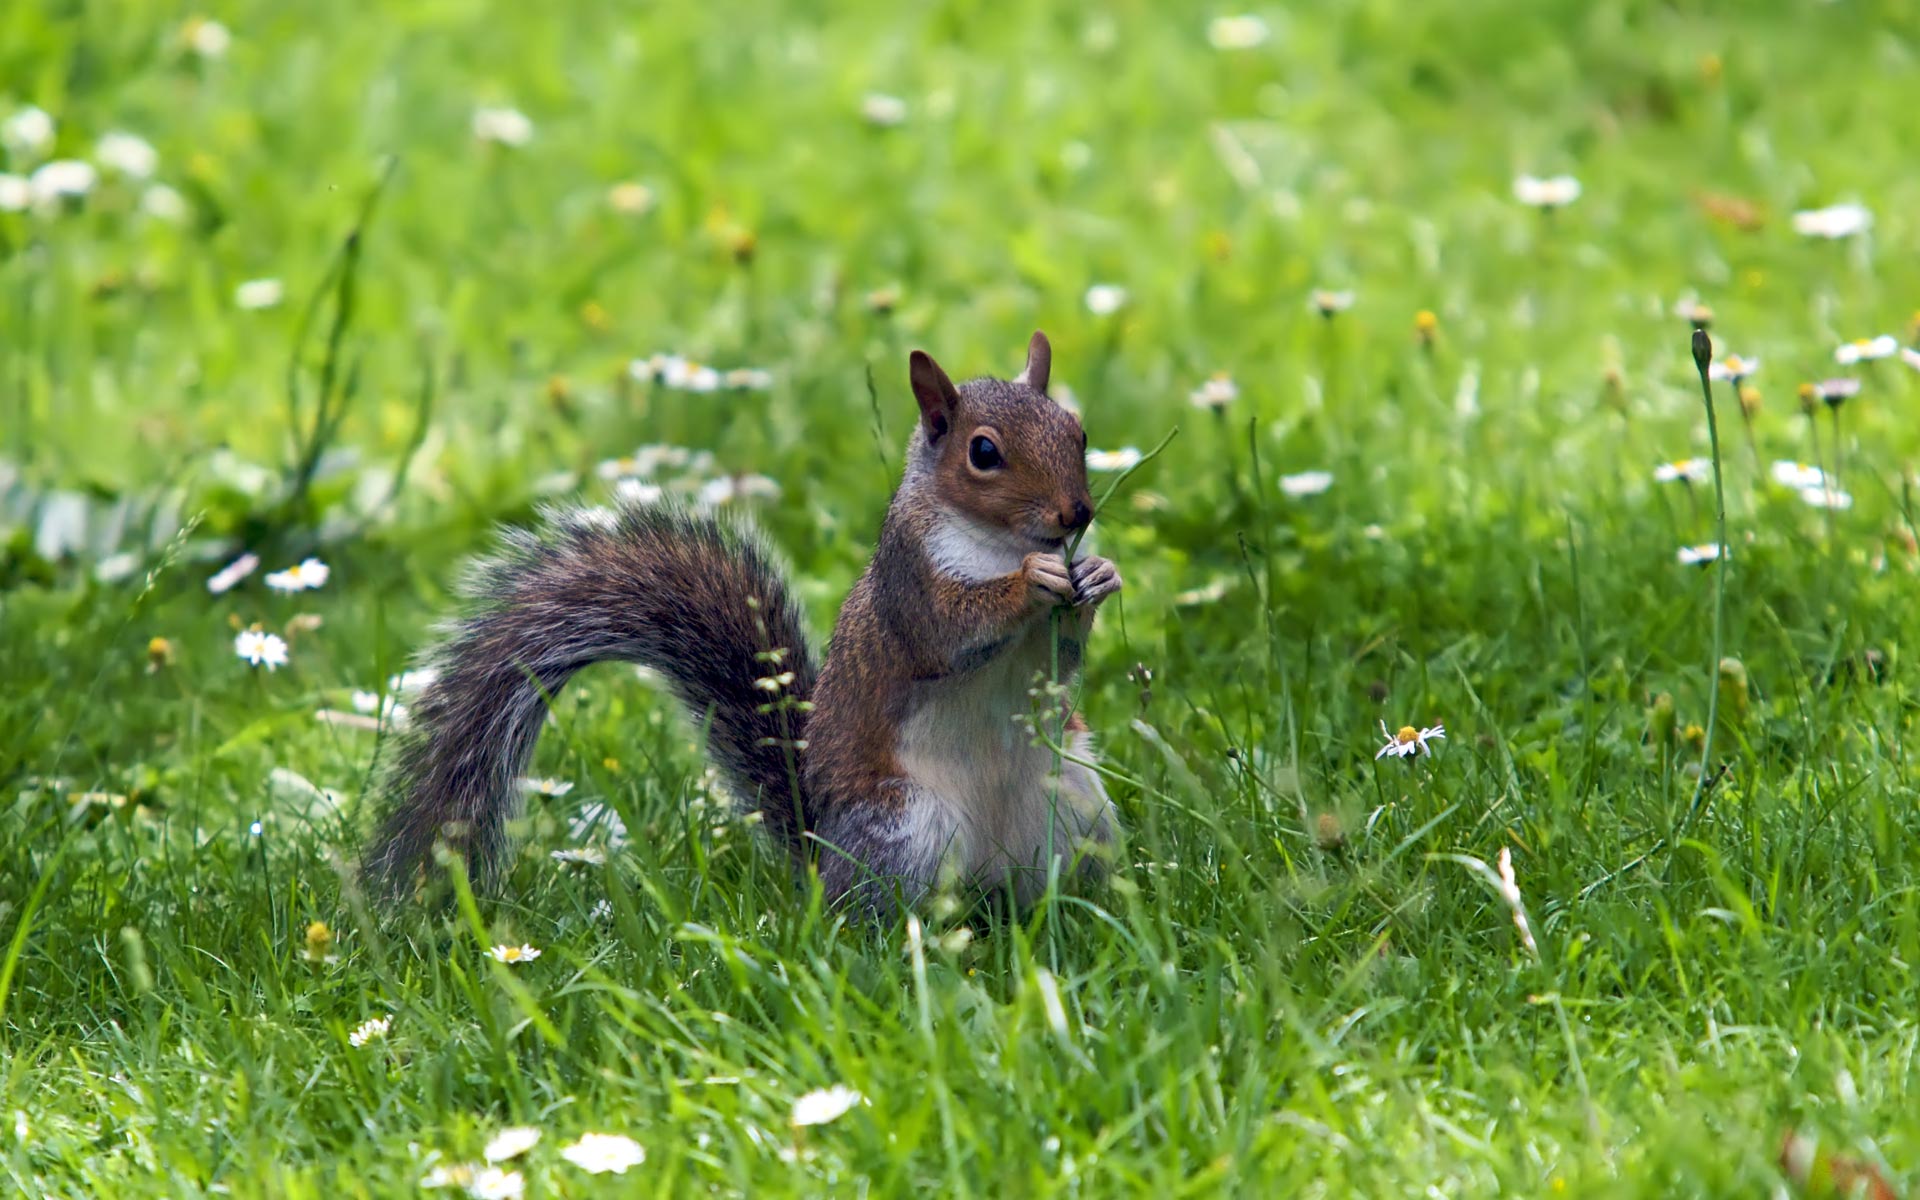  background funny squirrel backgrounds fun grass eating wallpapersjpg 1920x1200